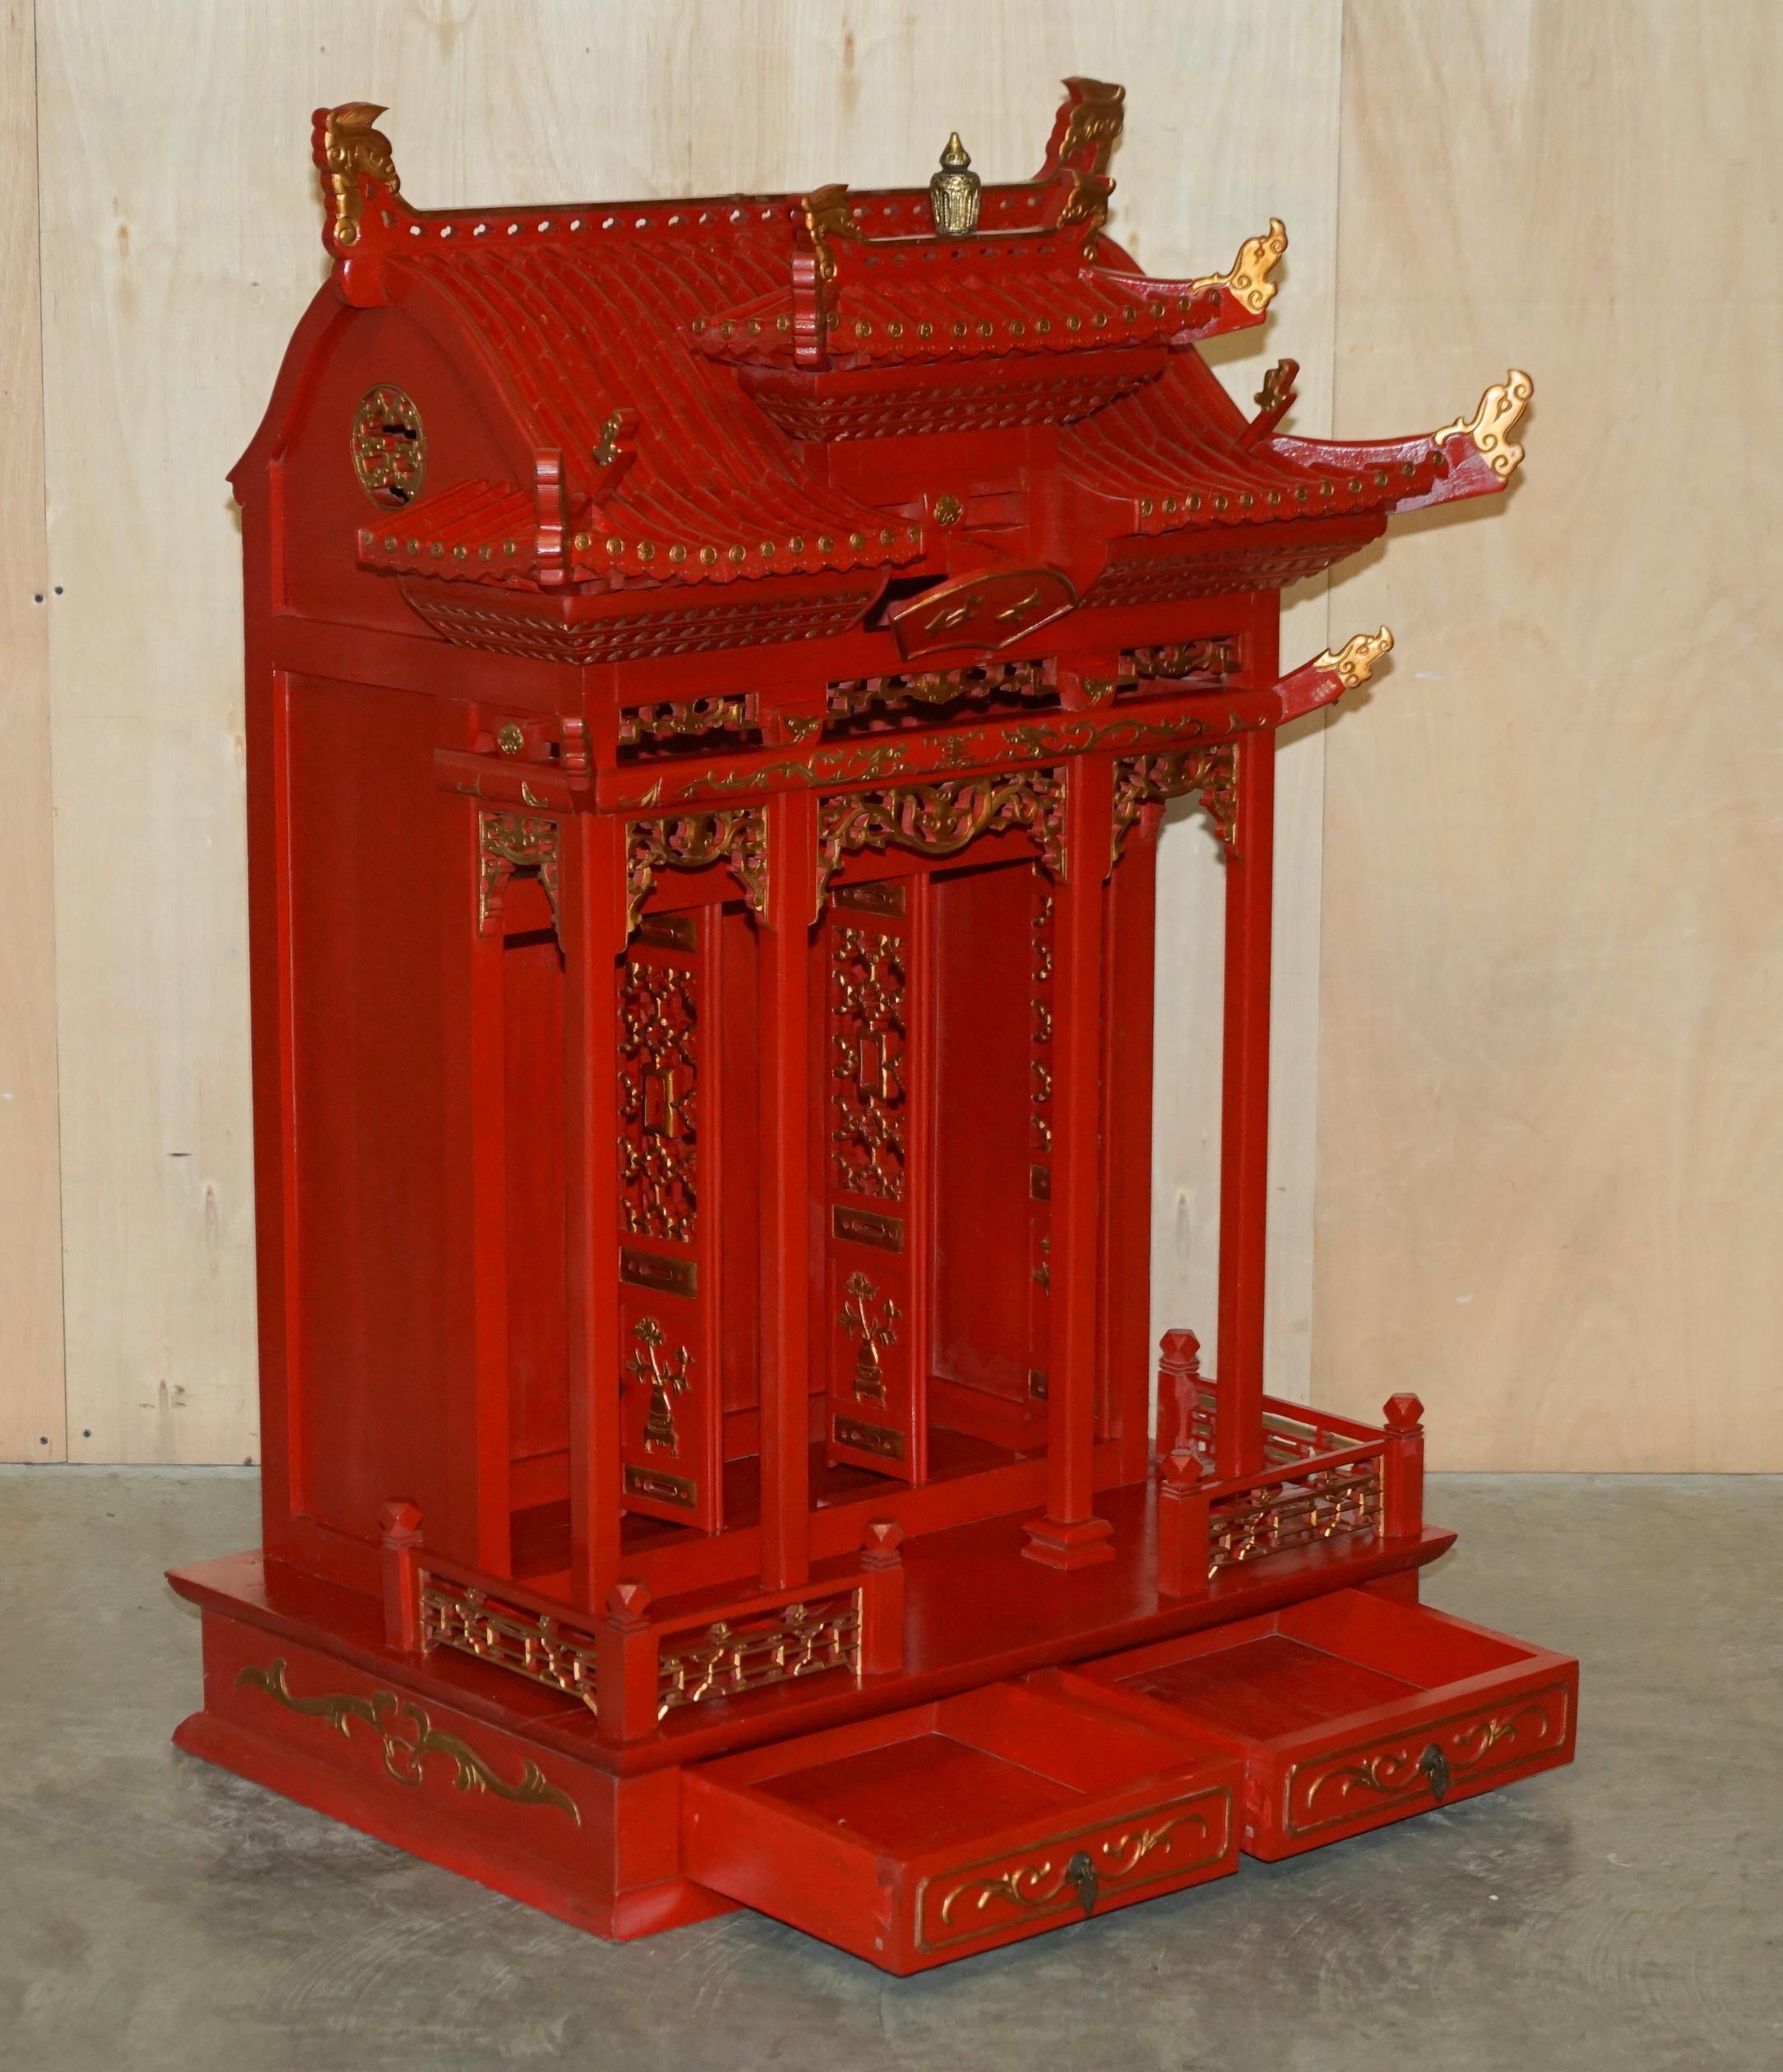 Rare Oriental Chinese Export Vintage Pagoda Top Red Cabinet Very Decorative For Sale 9